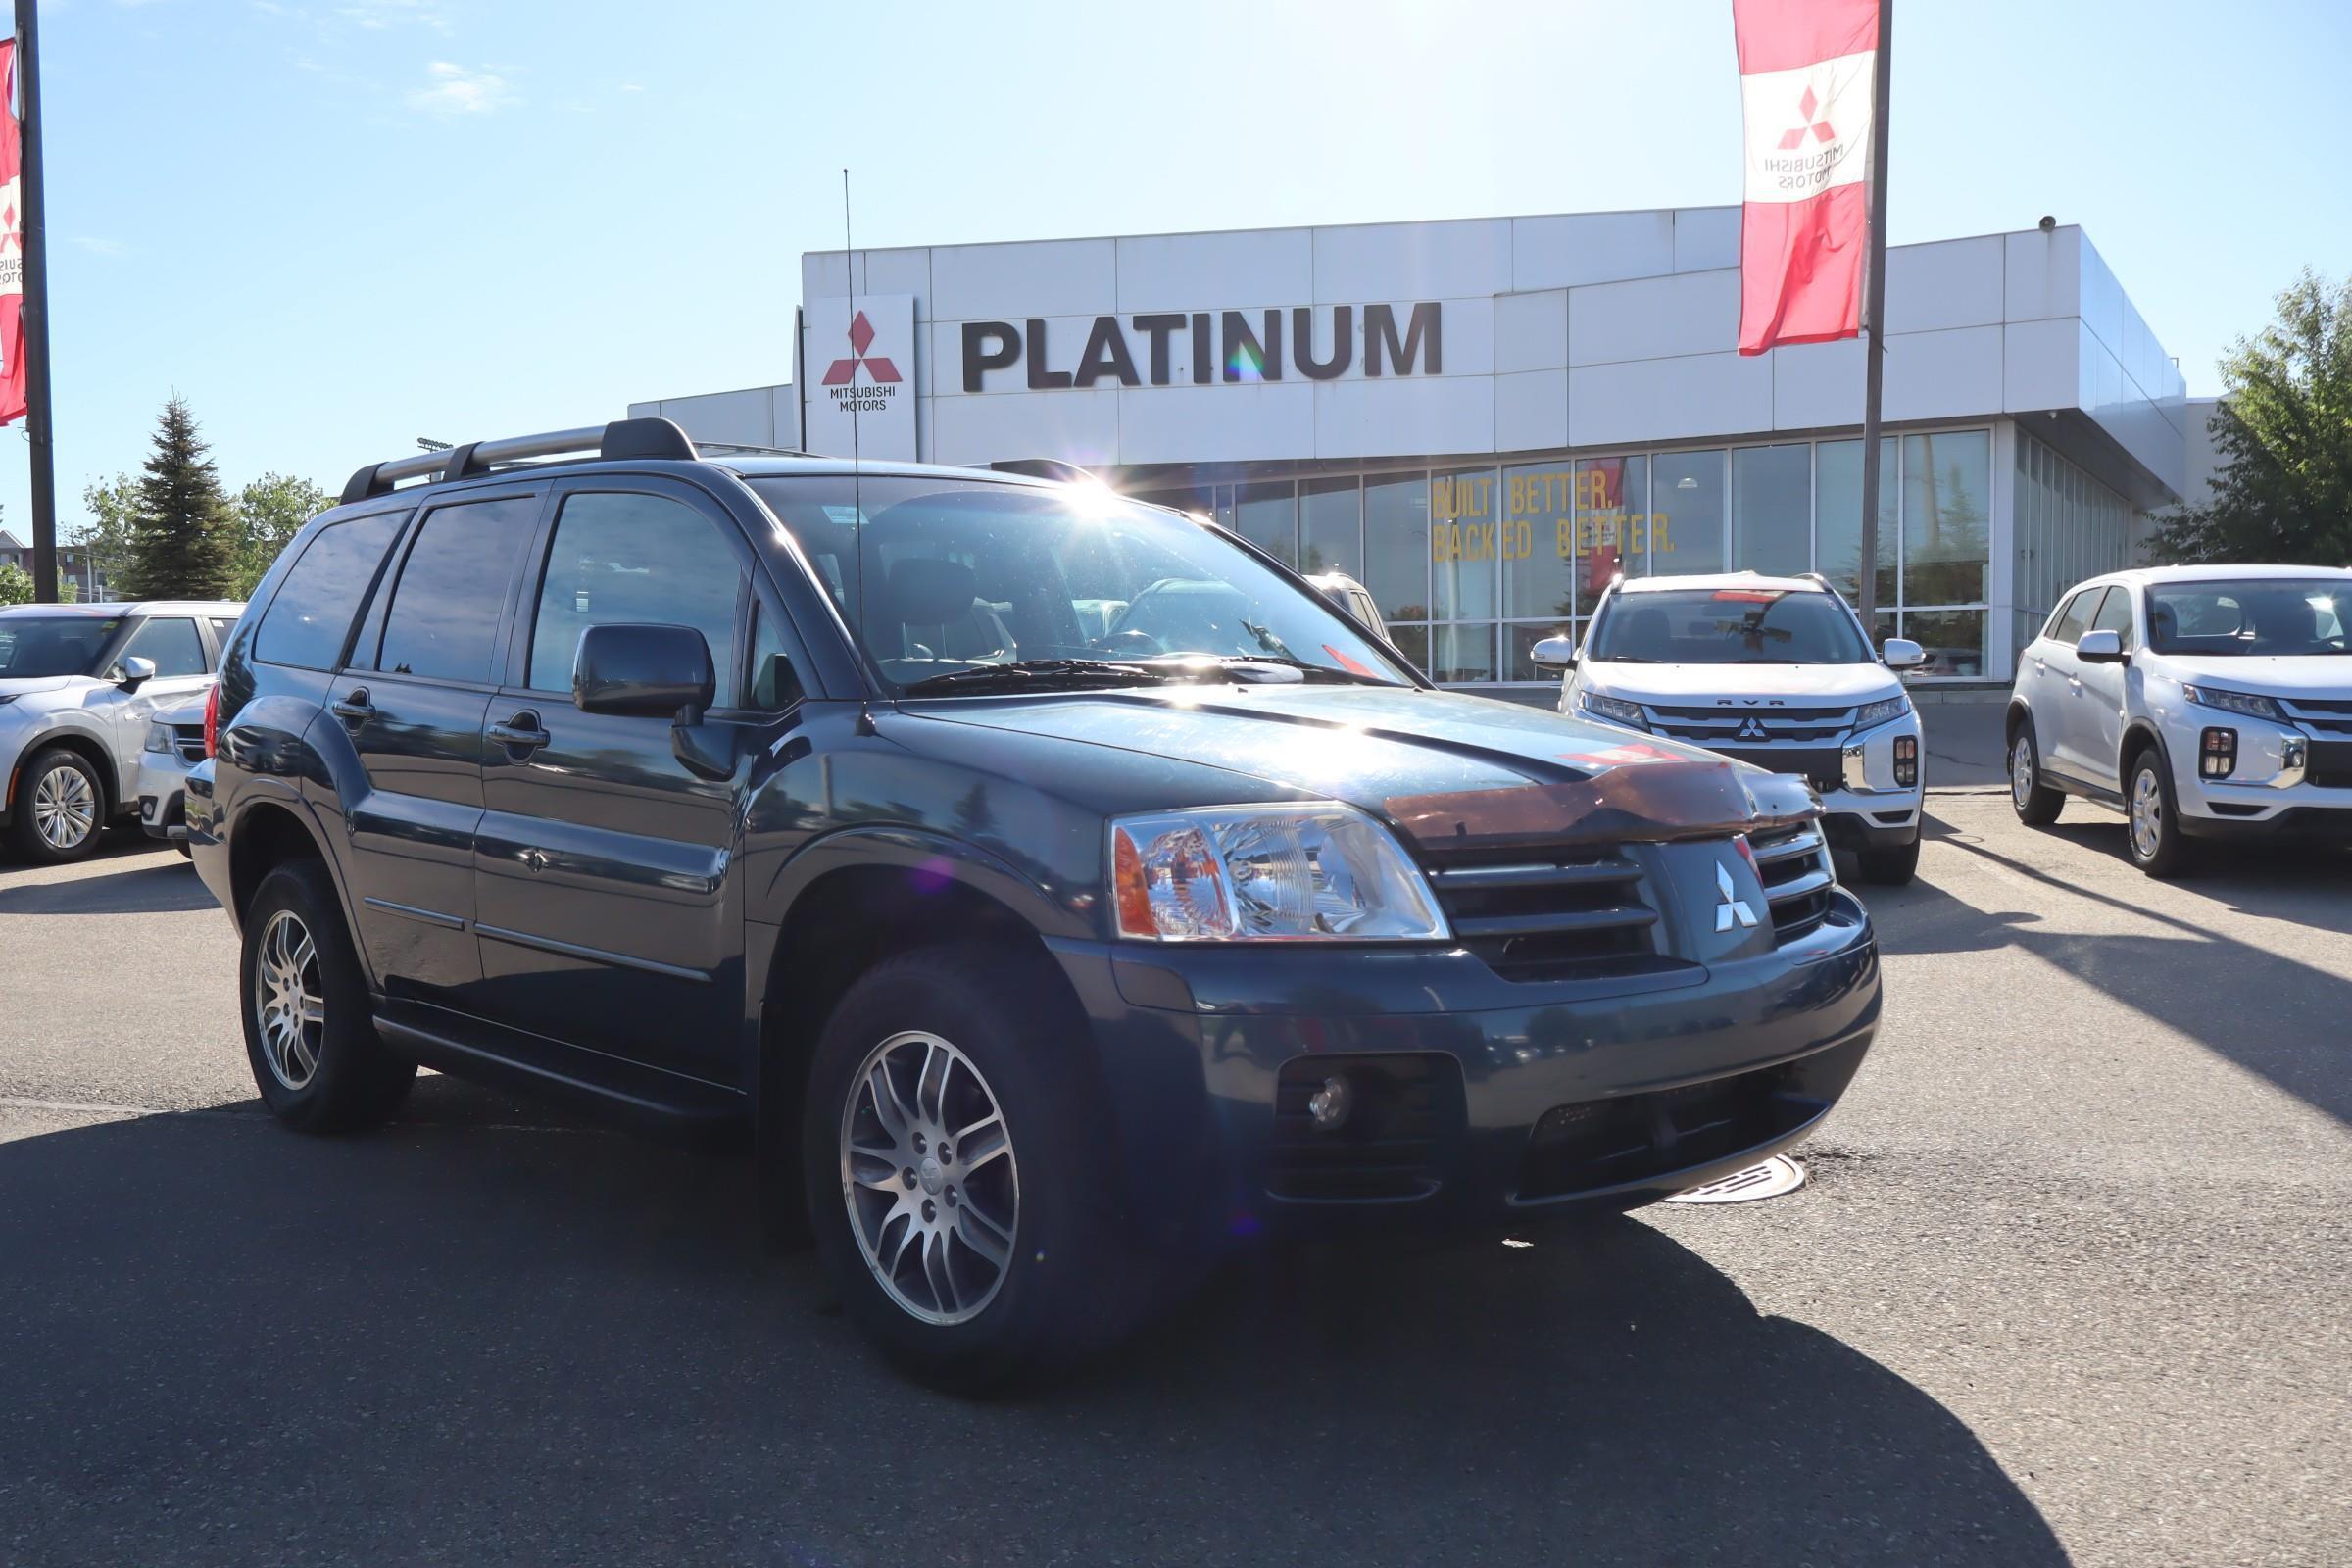 2004 Mitsubishi Endeavor Limited AWD | Low KM - 1 Owner - Great Condition